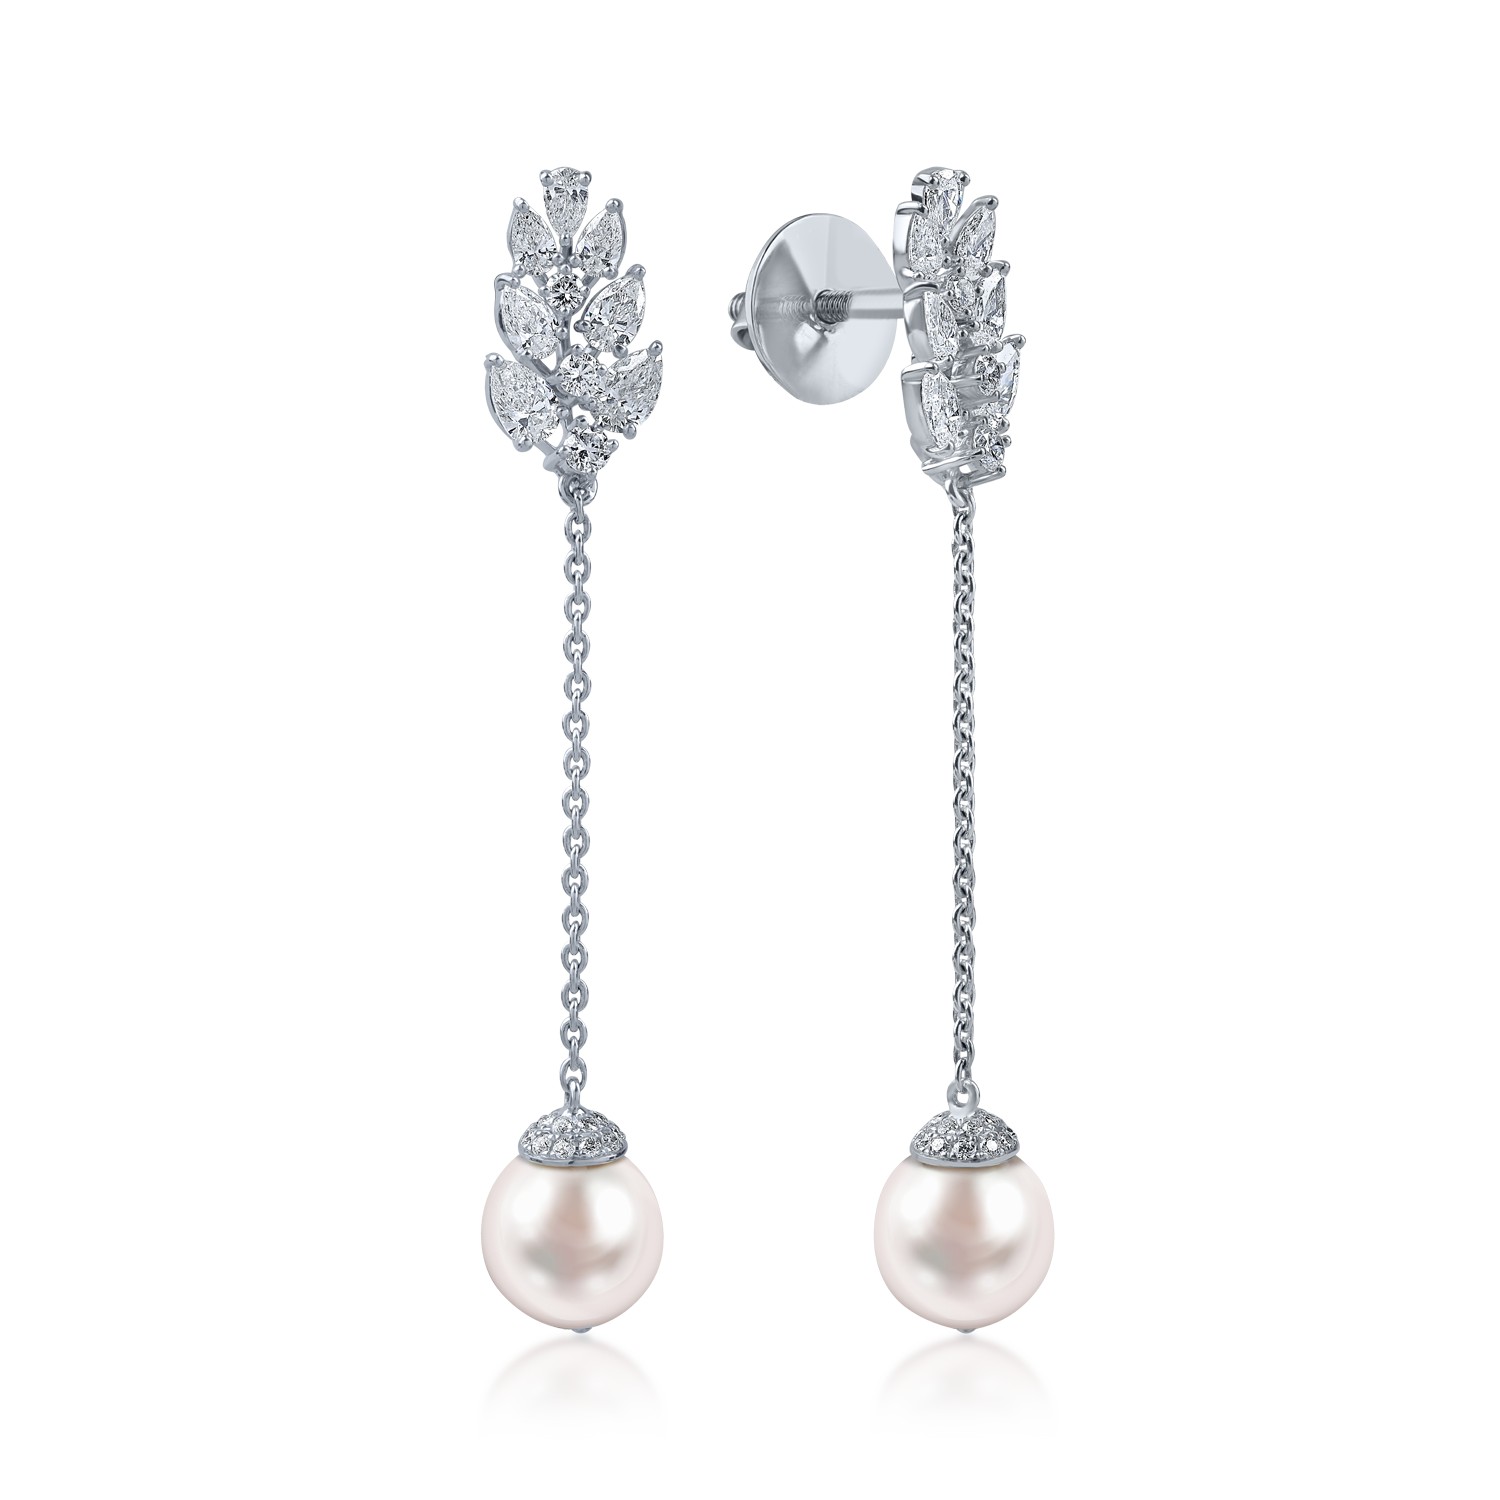 White gold long earrings with 10.8ct fresh water pearls and 1.88ct diamonds